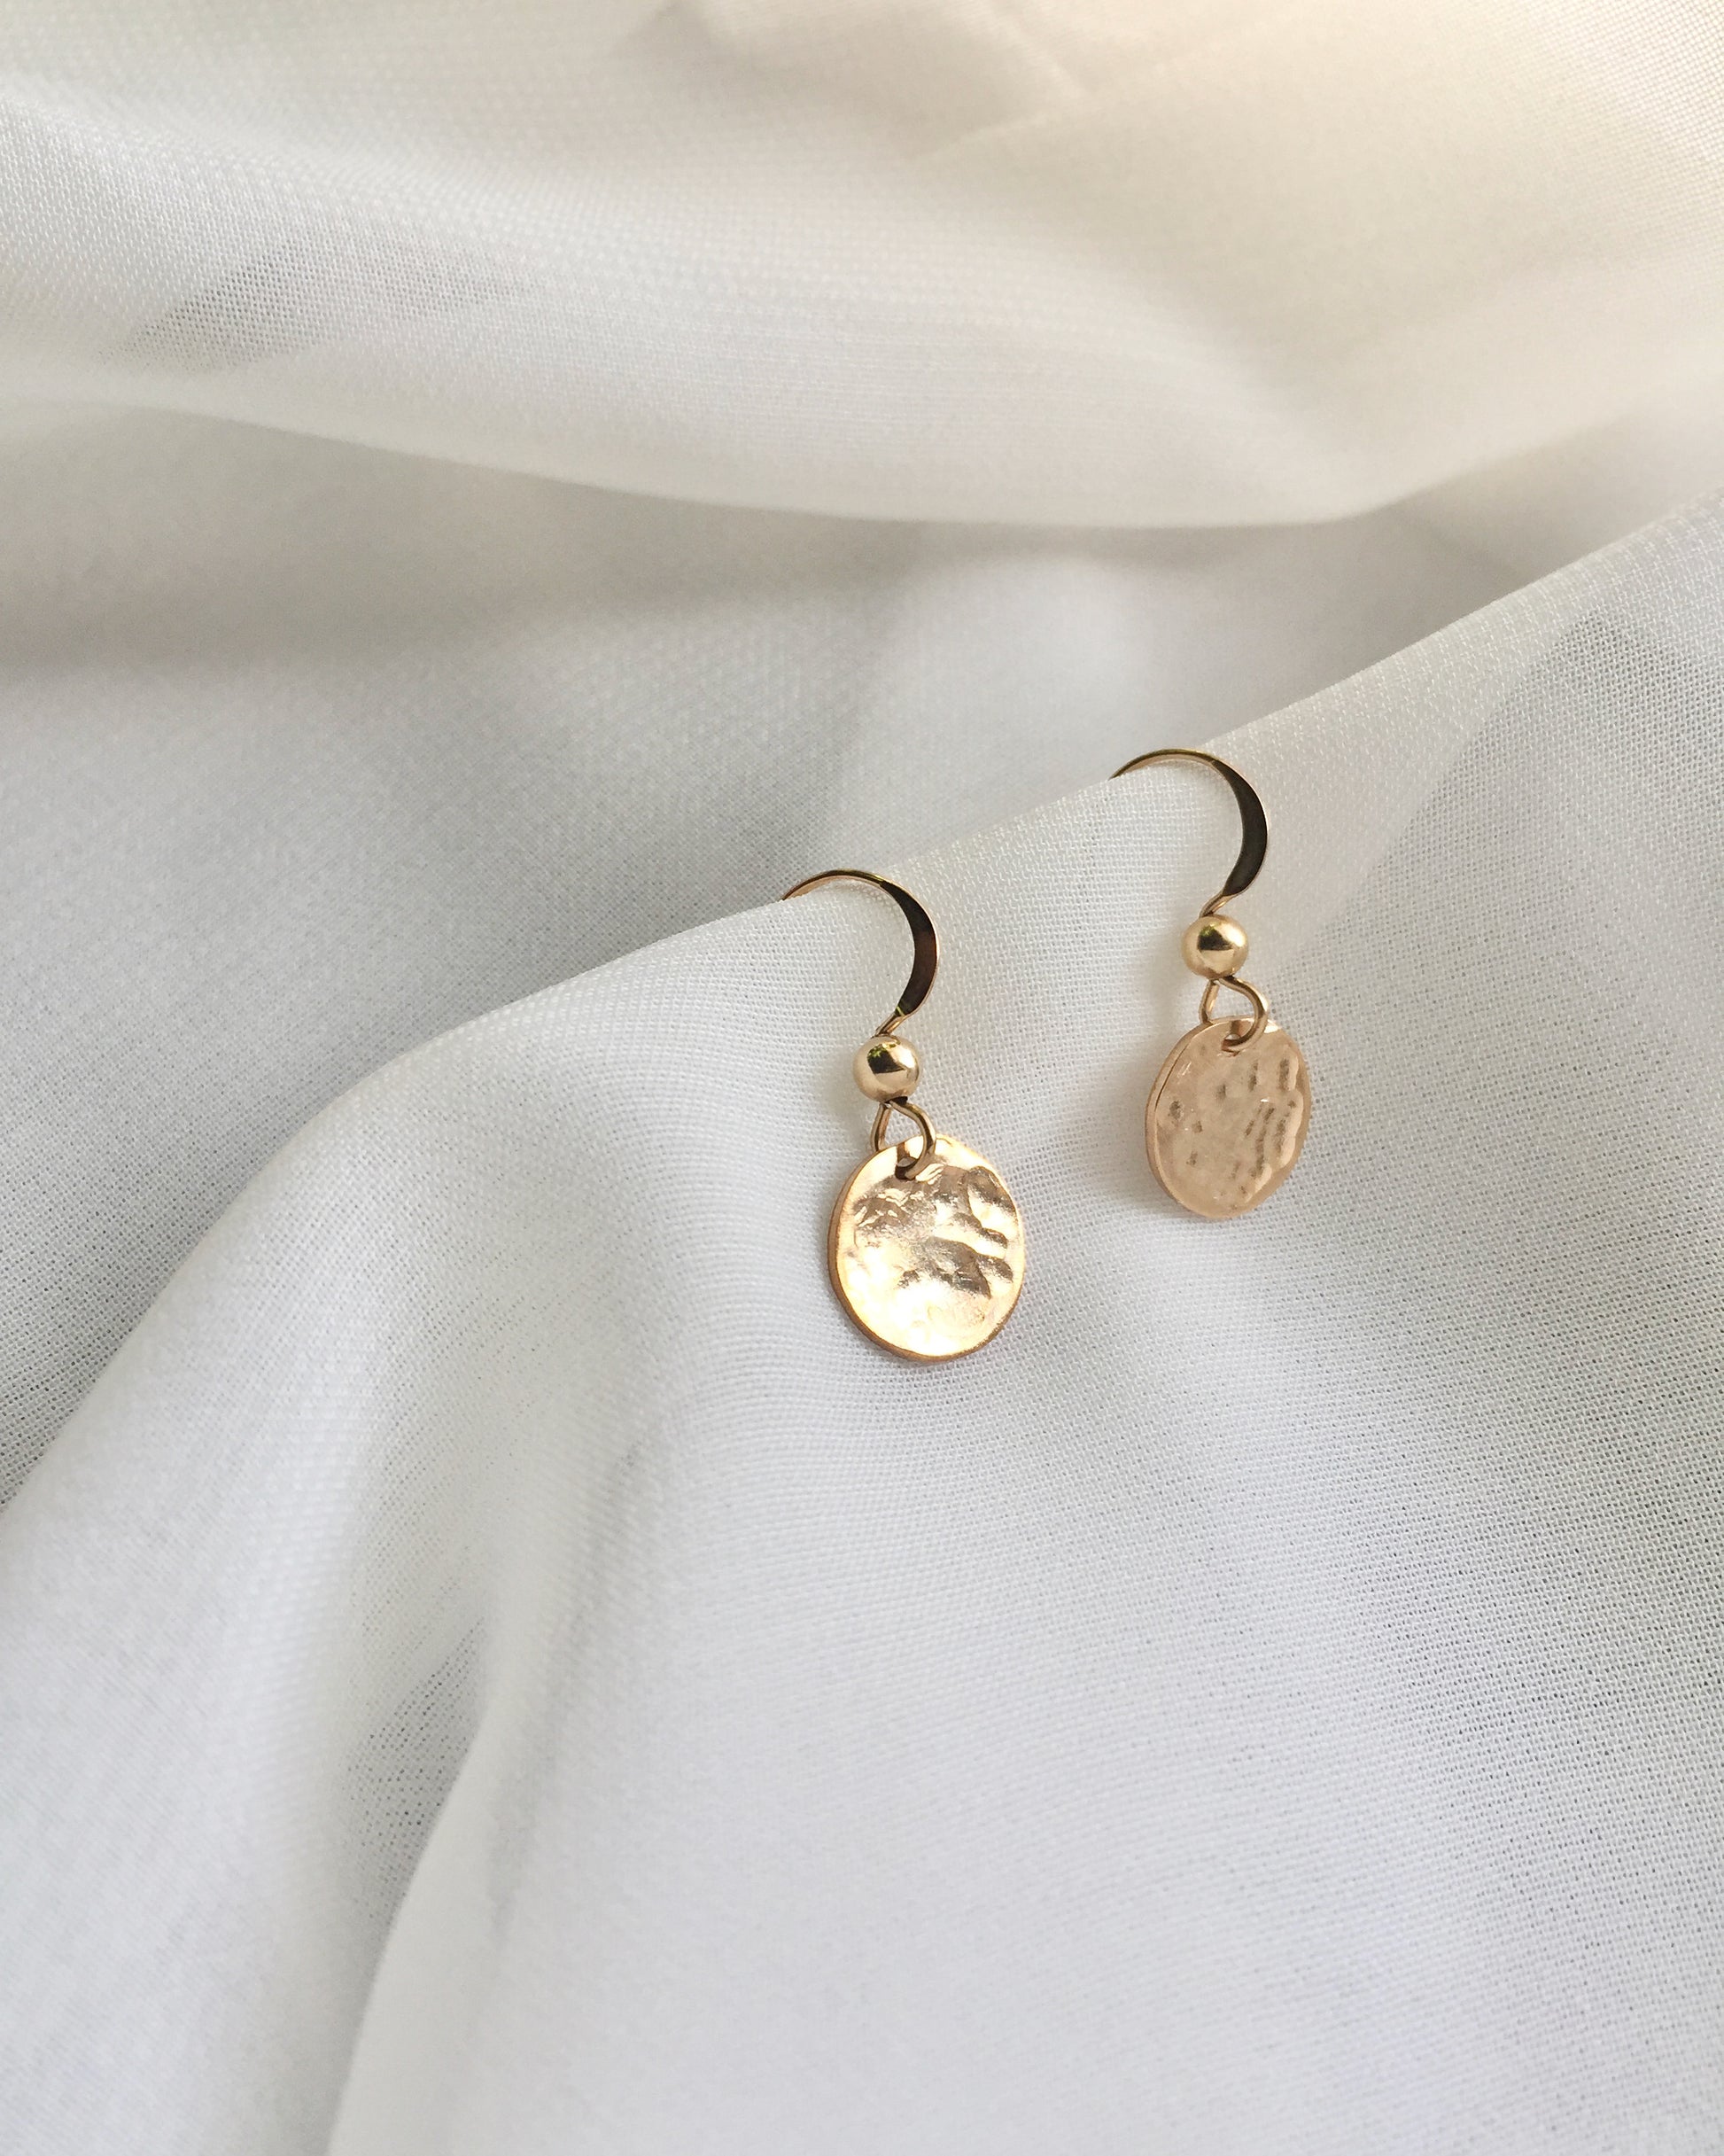 Small Hammered Disc Earrings in Gold Filled or Sterling Silver | Delicate Everyday Earrings | IB Jewelry